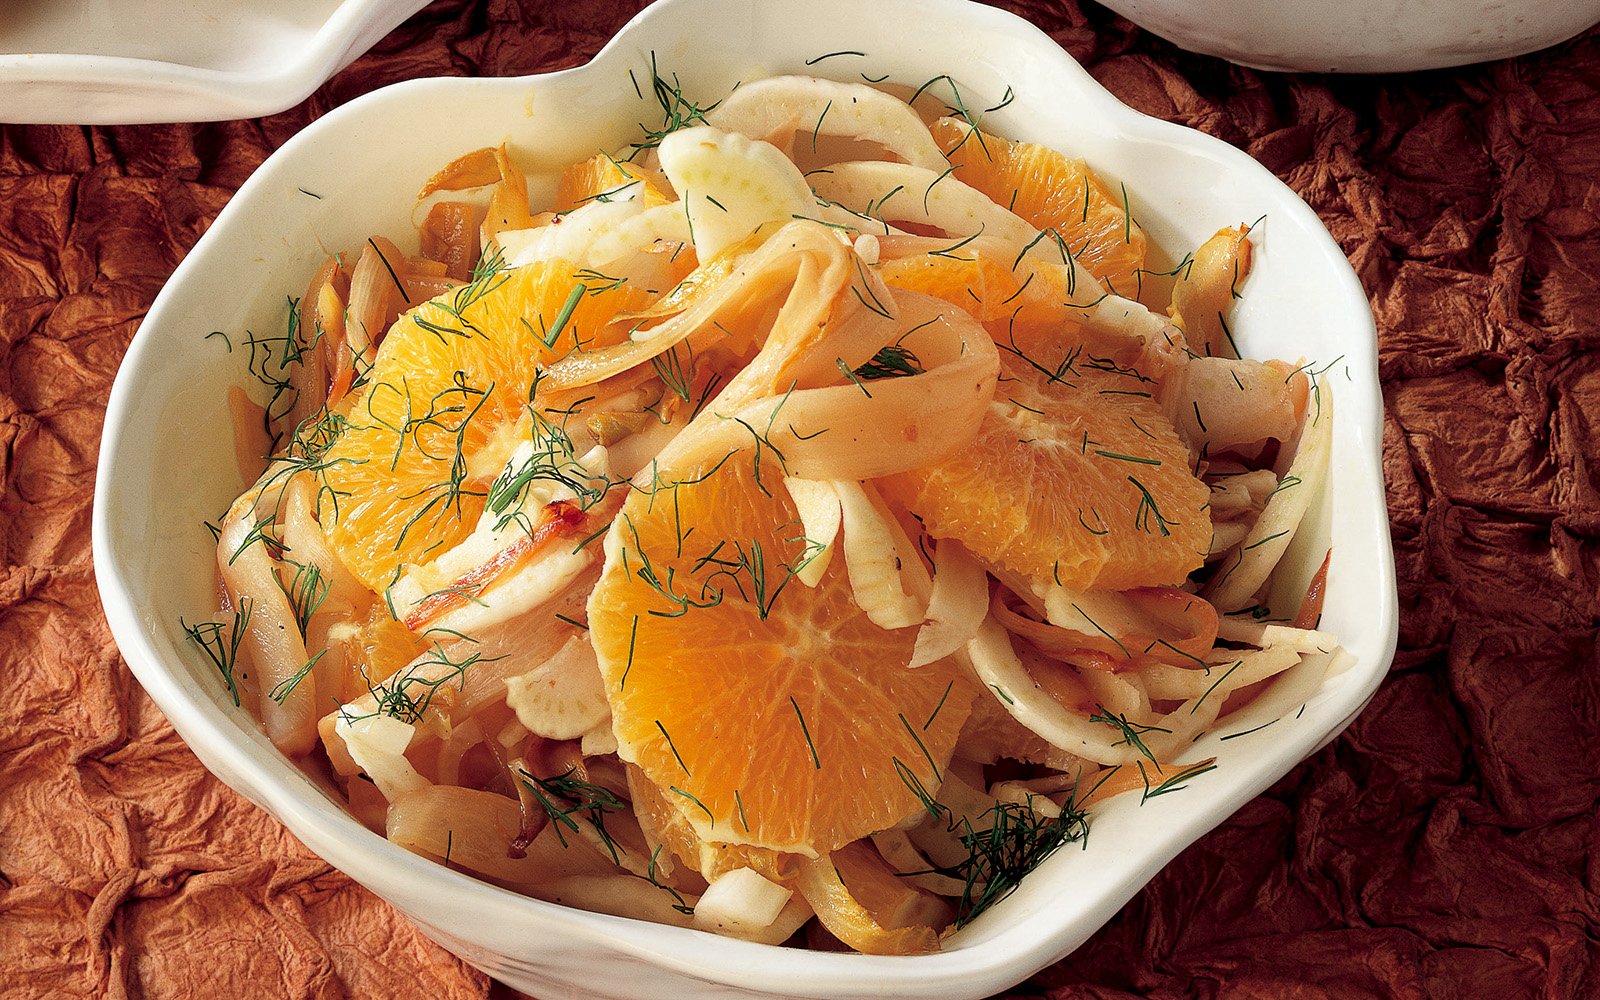 Endive recipe and raw fennel with orange